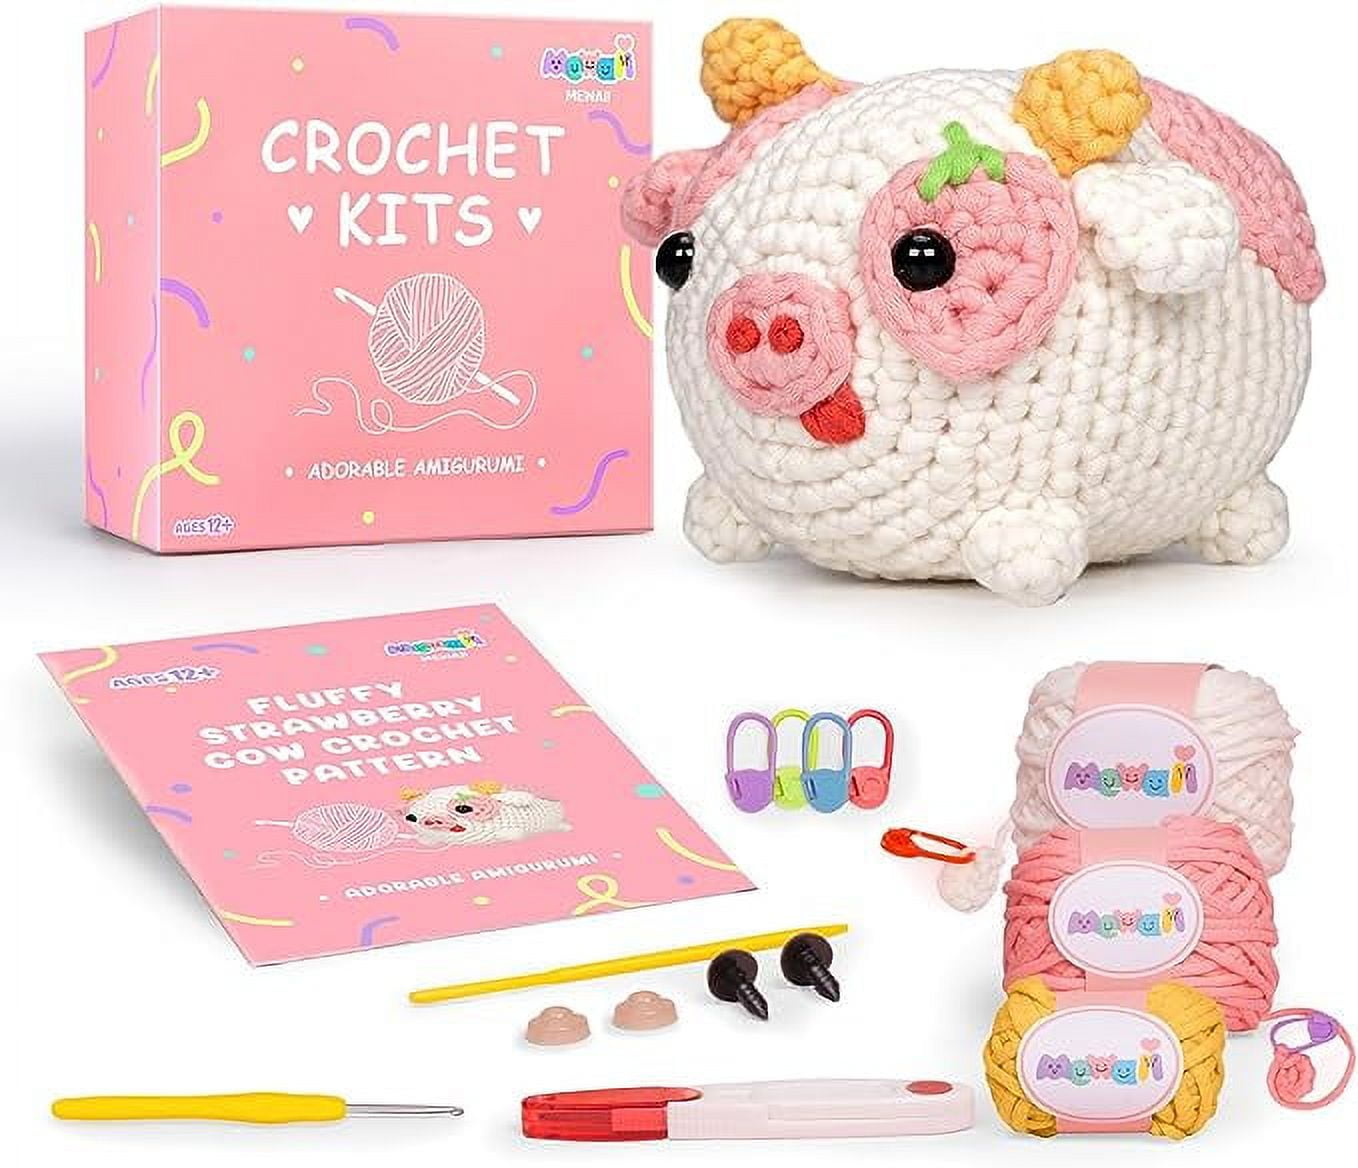 Buy Complete Crochet Kit for Beginners: All You Need in, Create Your First  Amigurumi, Include Hook, Soft Yarn, and Accessories, Starter DIY Crafts and  Gifts, Cute Axolotl Design for Adults, Teens. Online